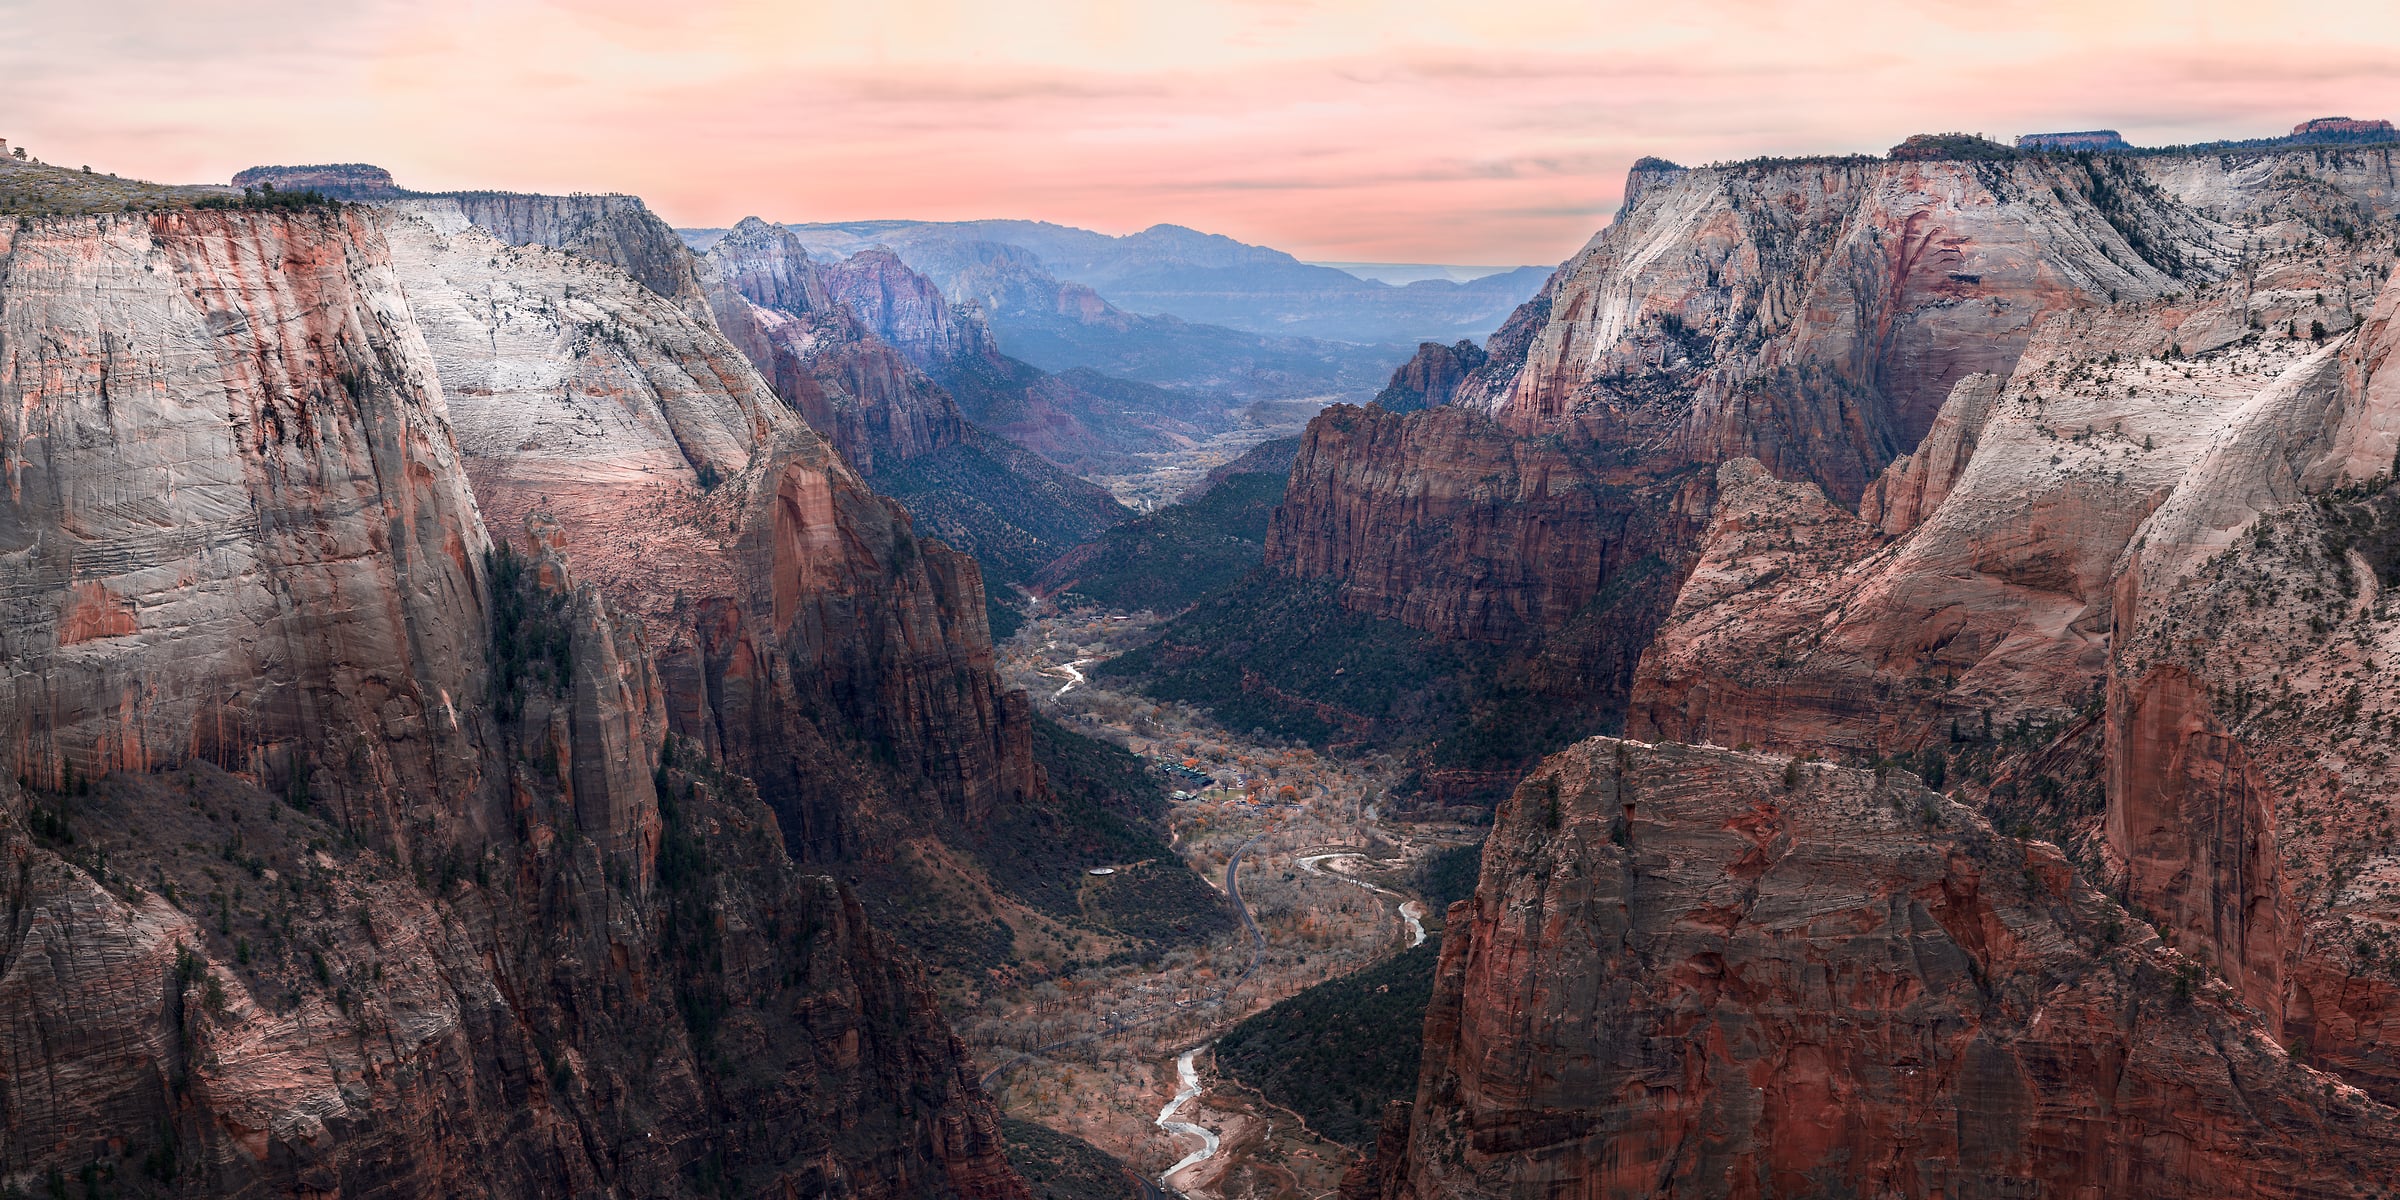 1,659 megapixels! A very high resolution, large-format VAST photo print of the Angels Landing rock formation in Zion National Park at sunset; photograph created by David David in Angels Landing, Zion National Park, Utah.